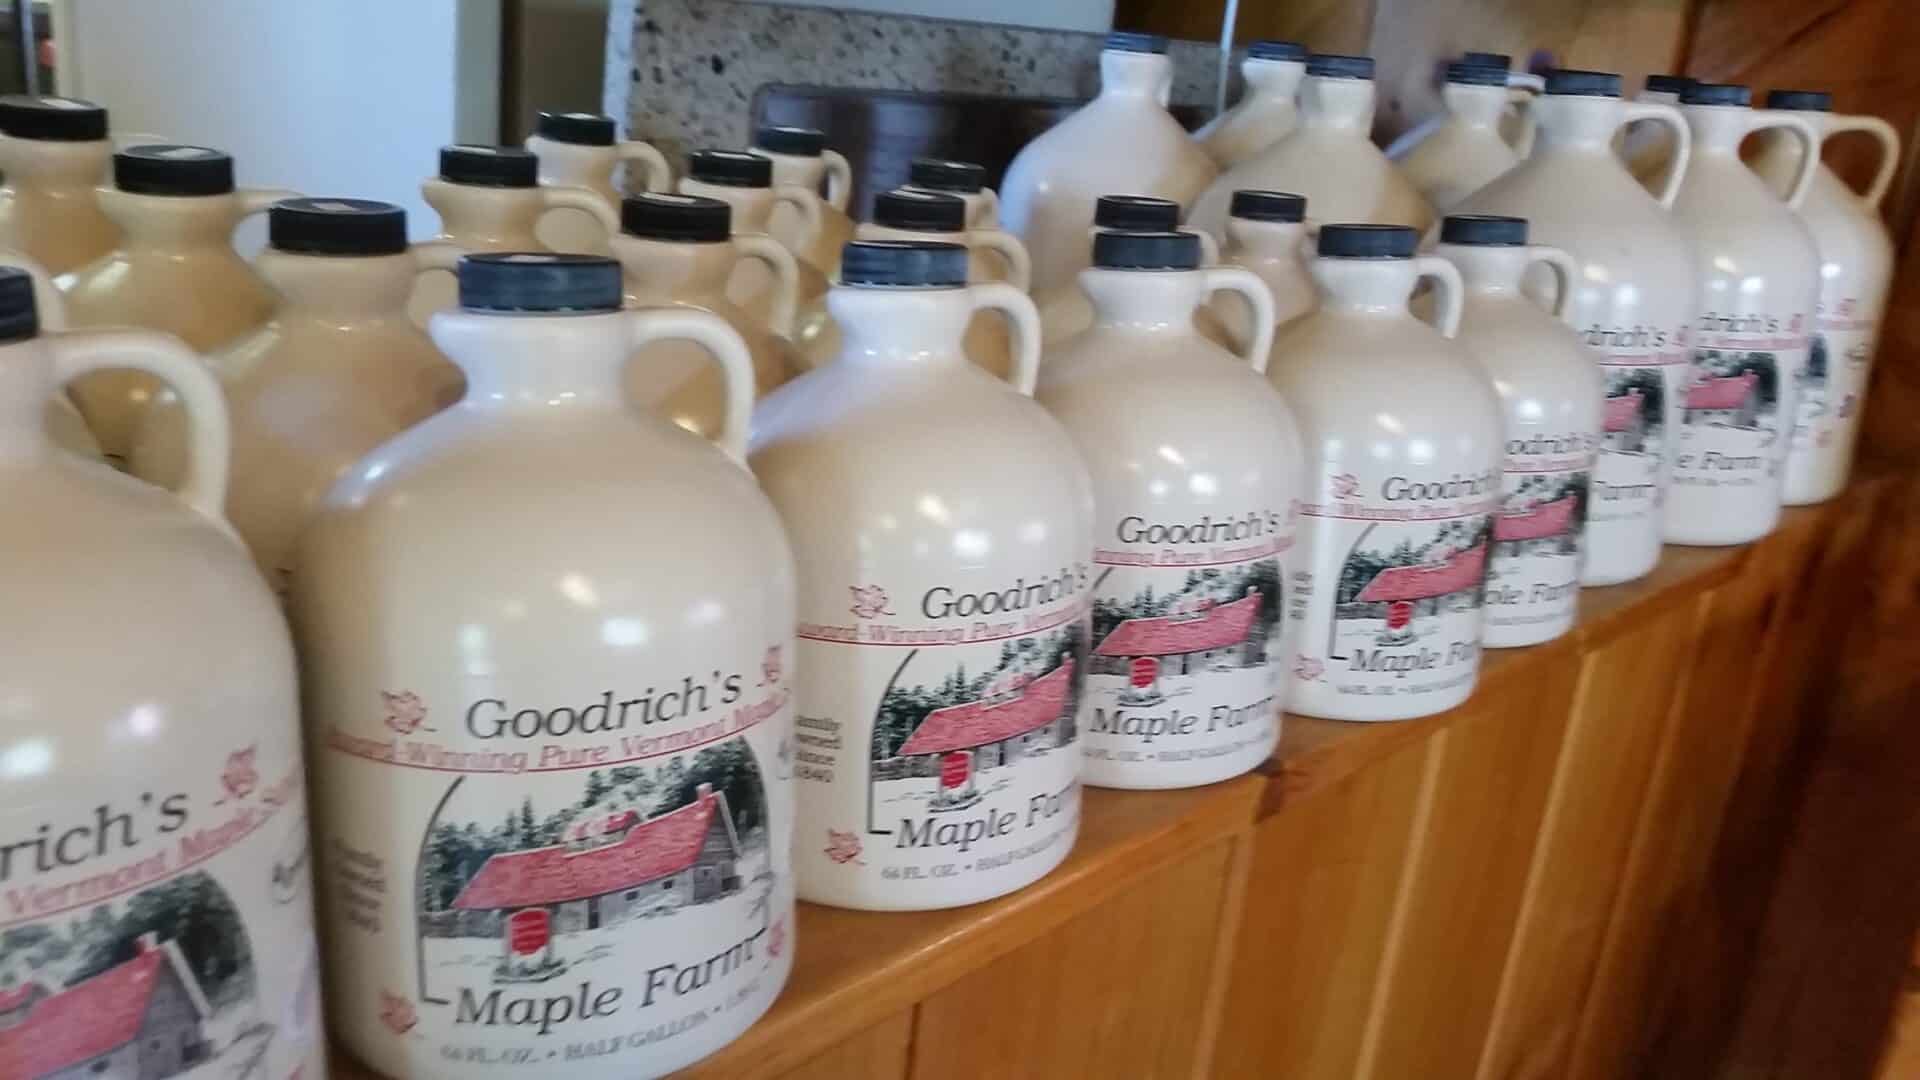 several plastic jugs of maple syrup from Goodrich farm in vermont